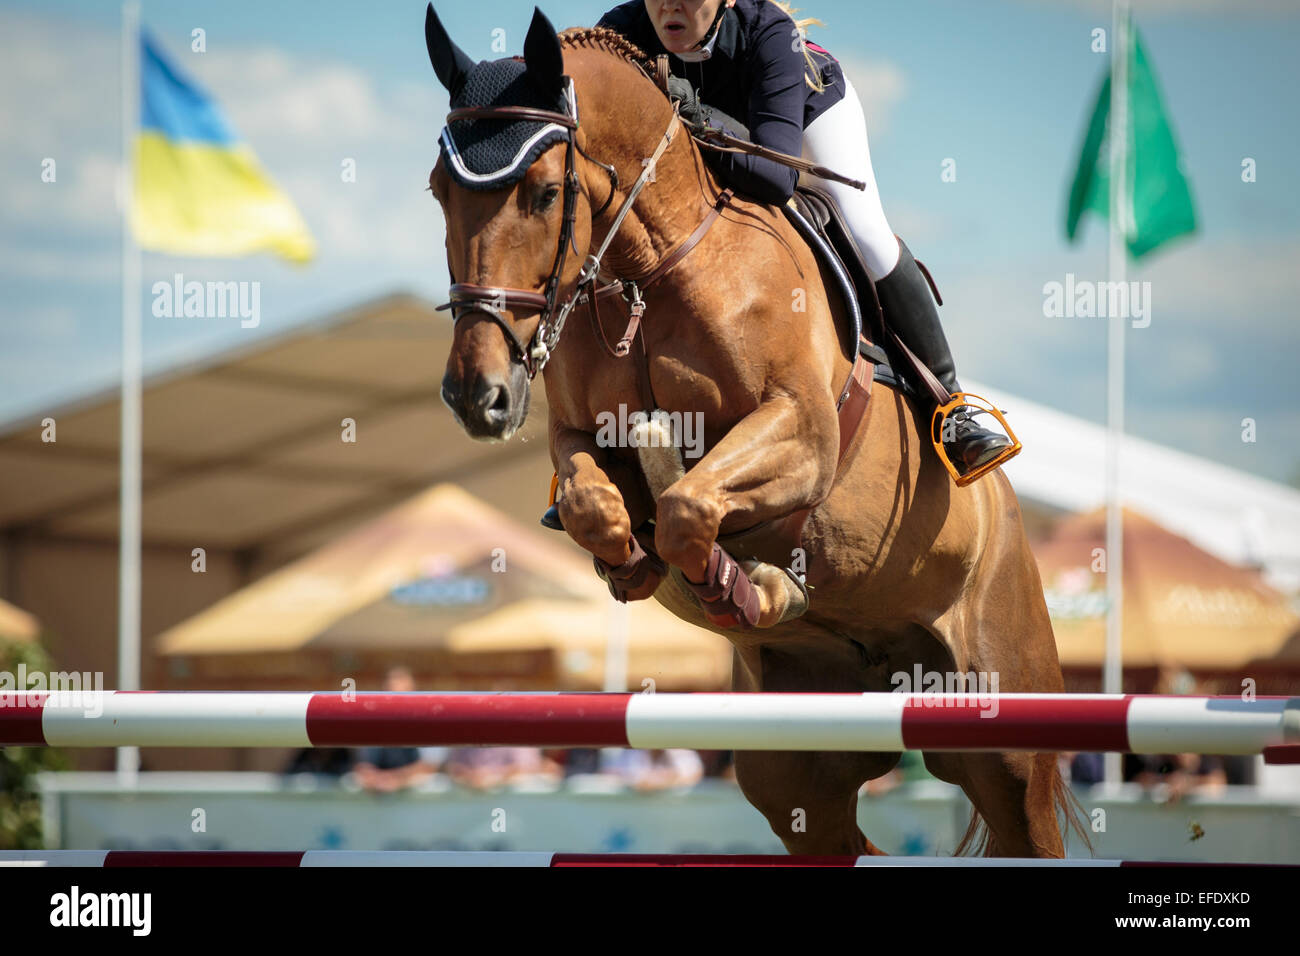 A rider on a sports horse jumping over an obstacle in equestrian competition Stock Photo